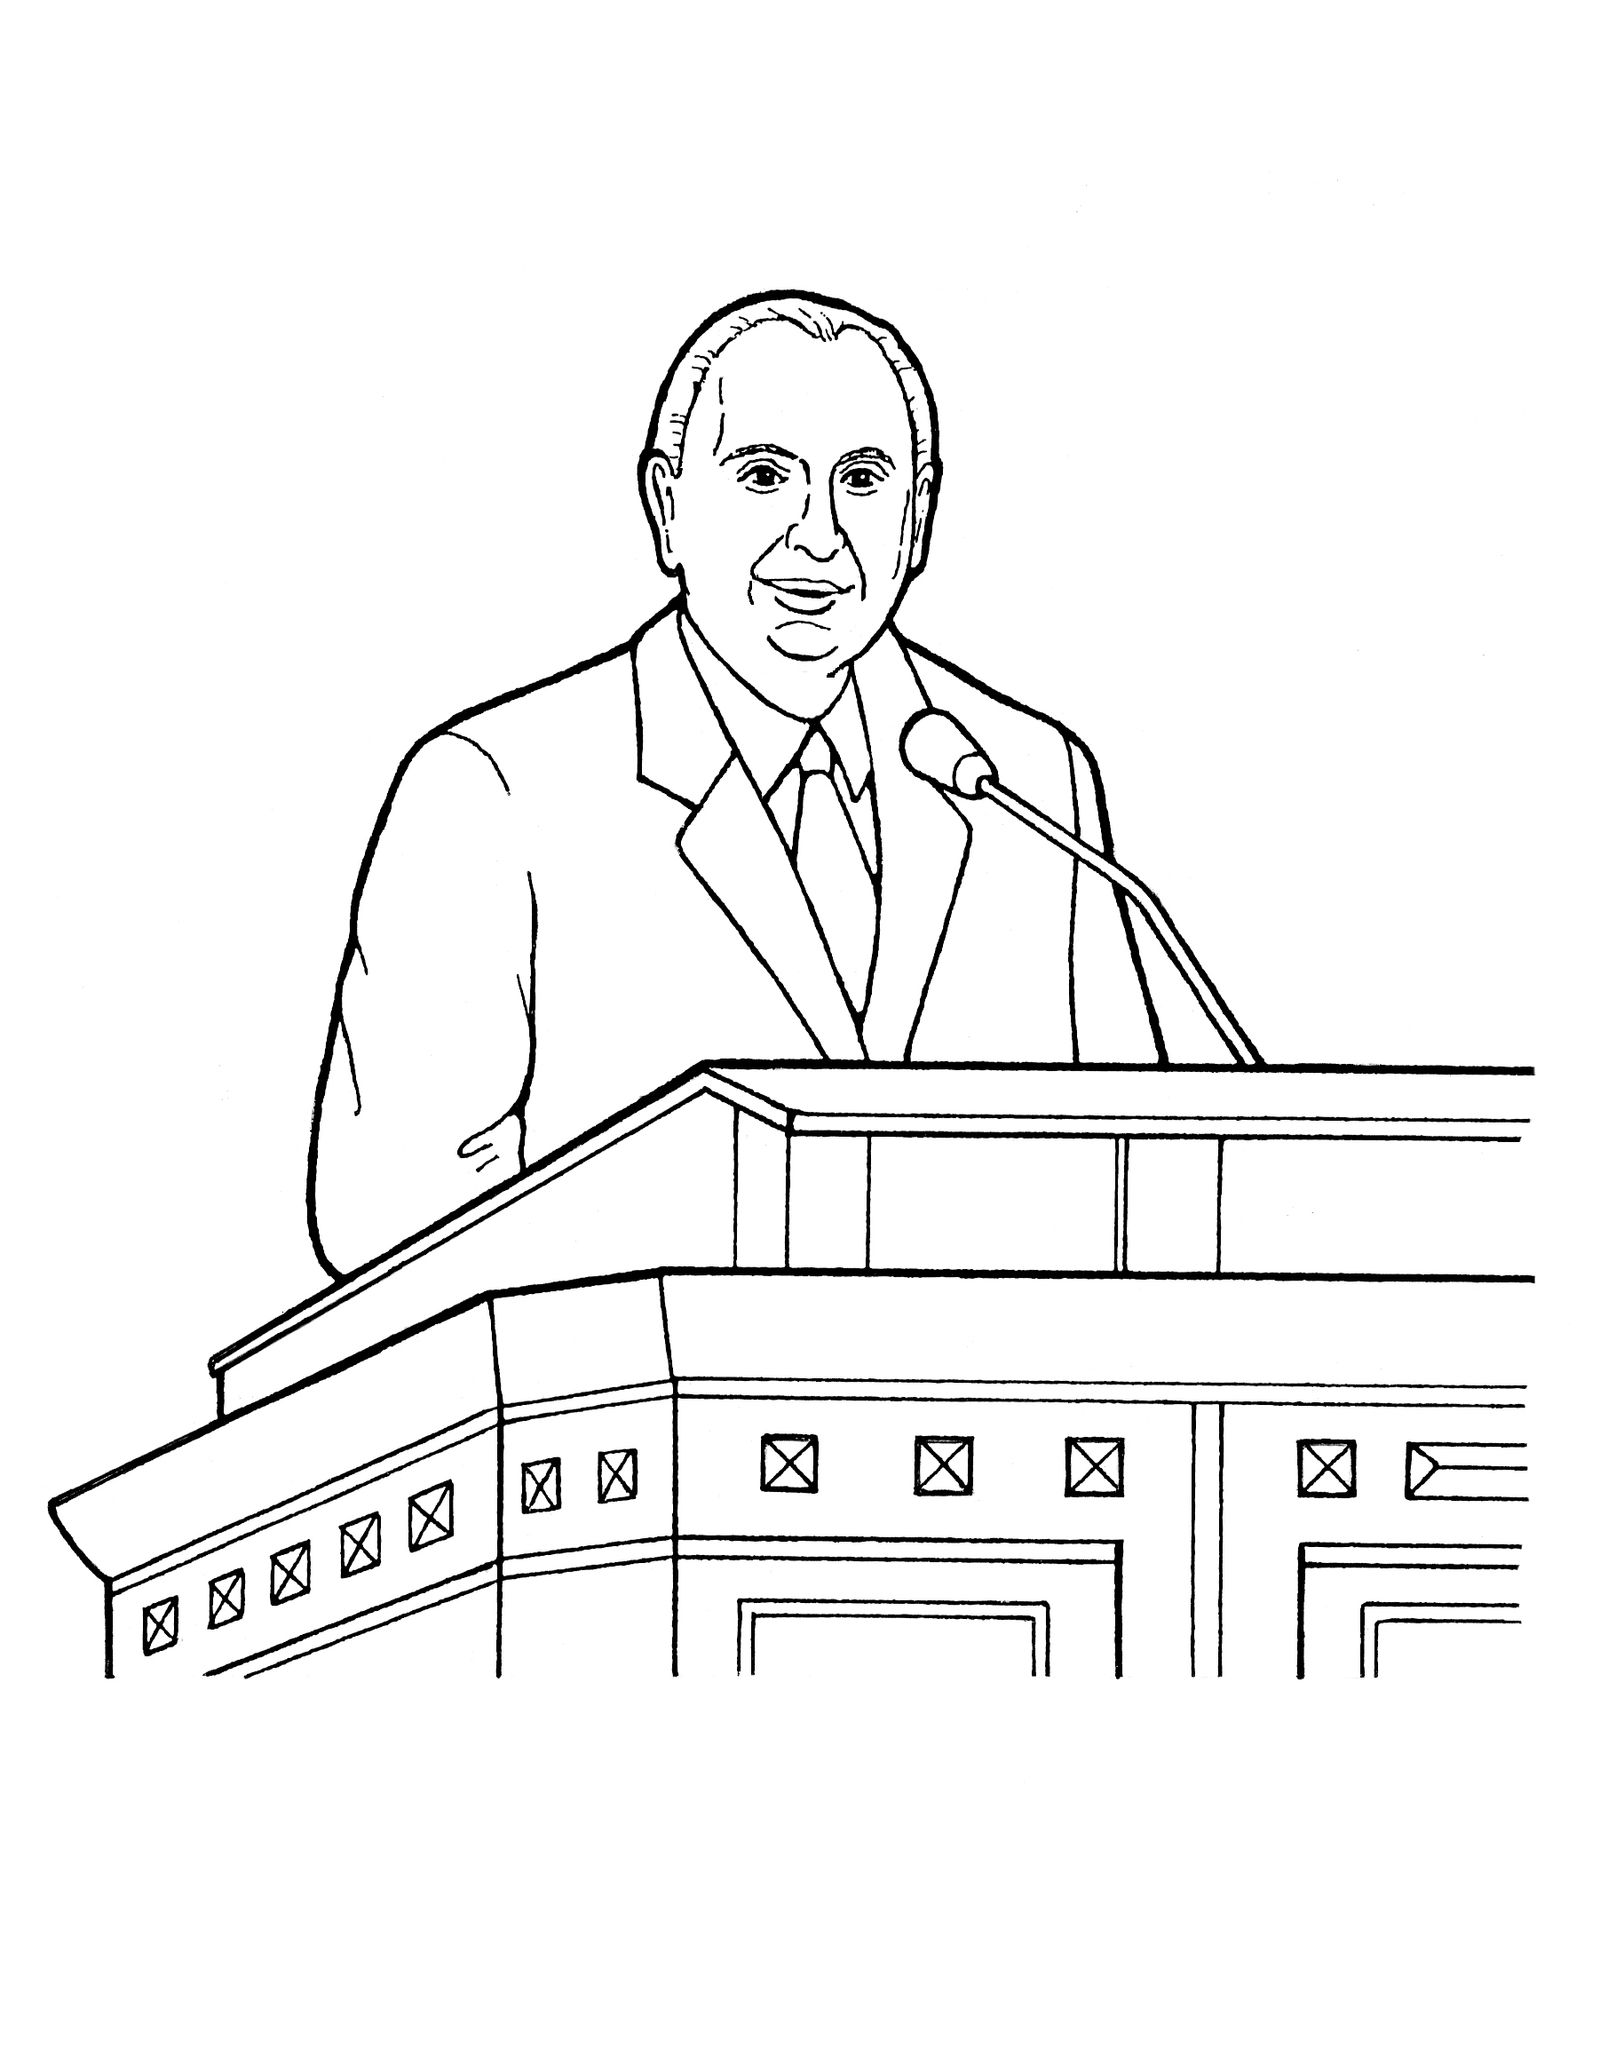 An illustration of Thomas S. Monson speaking at general conference.